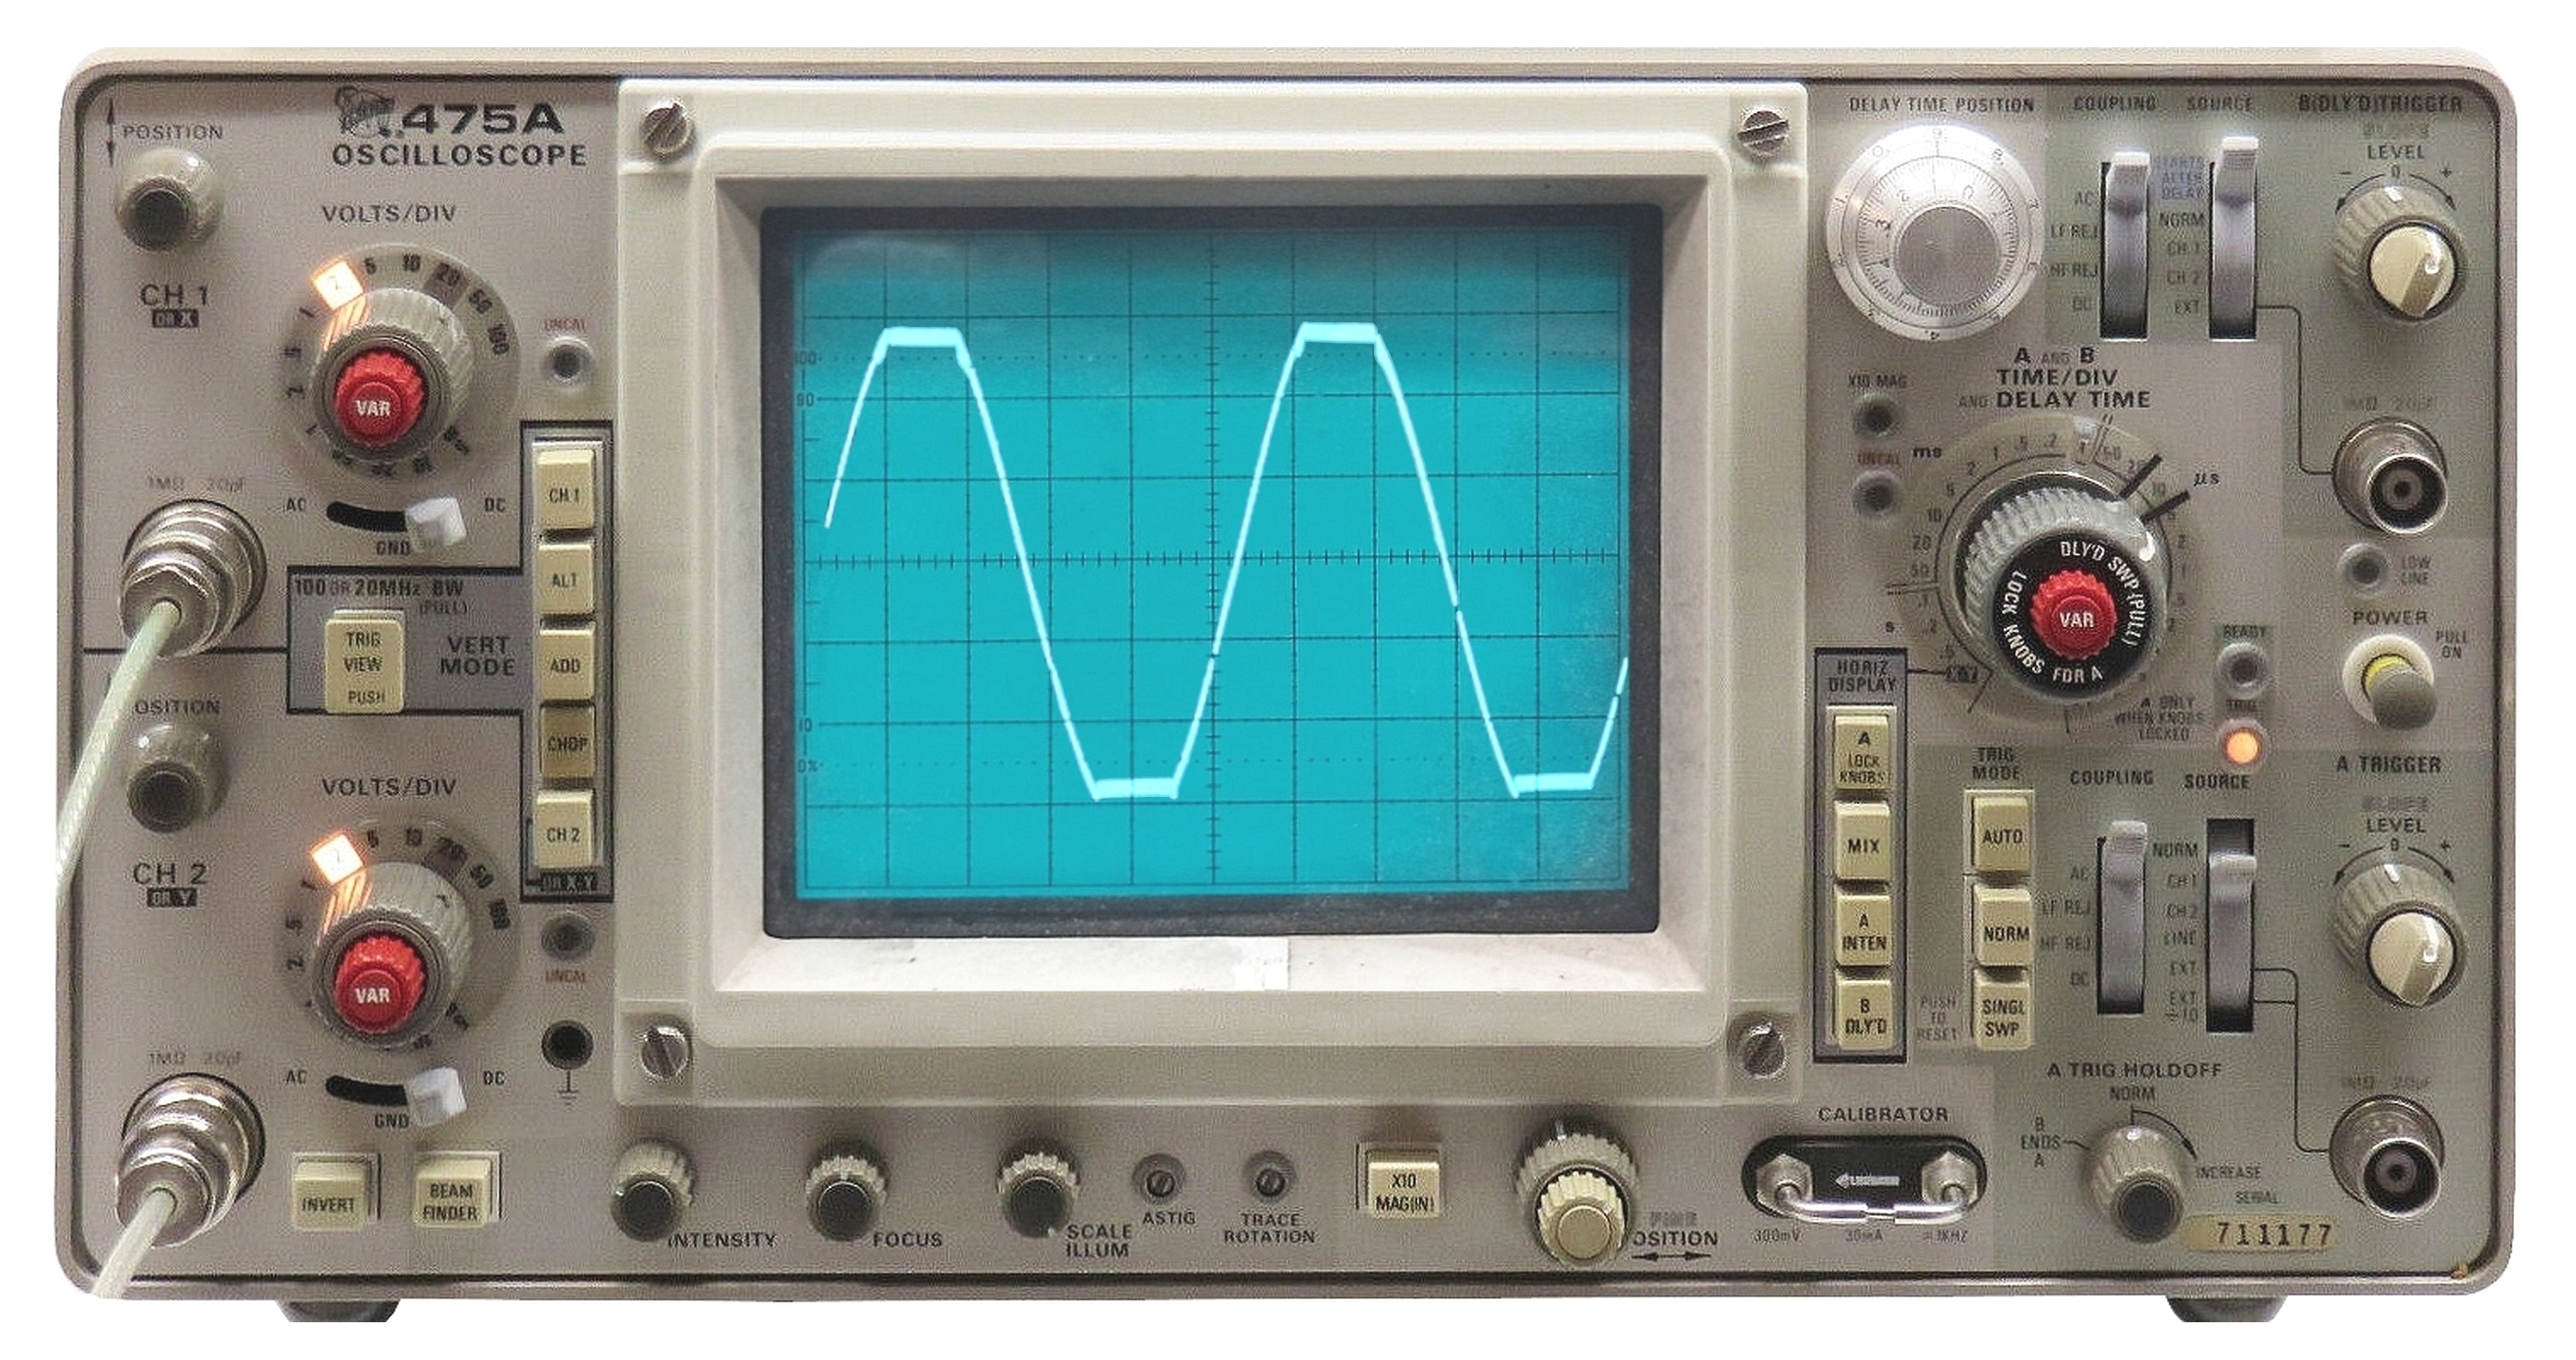 Summon the geek squad: An Oscilloscope Watch! | Electronic gift ideas,  Electronics basics, Electronic circuit projects